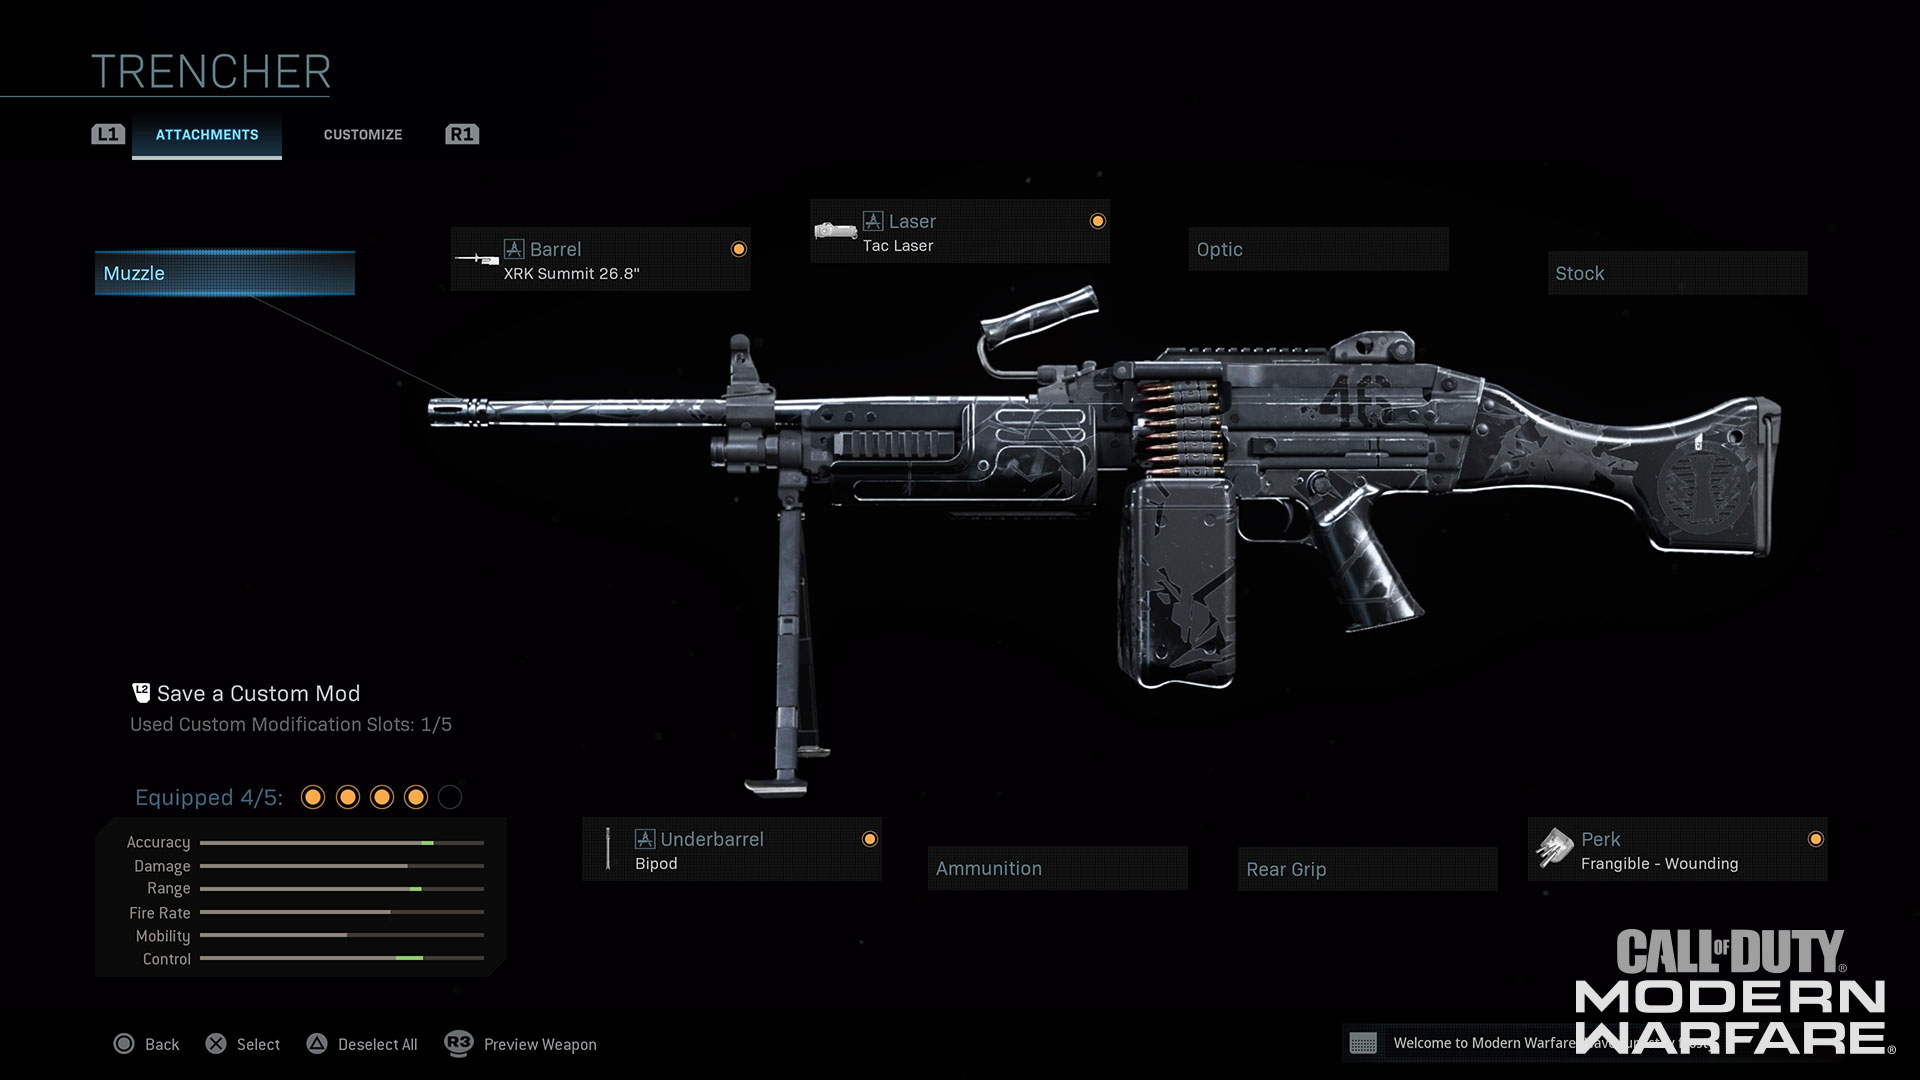 An LMG with negative tracer rounds